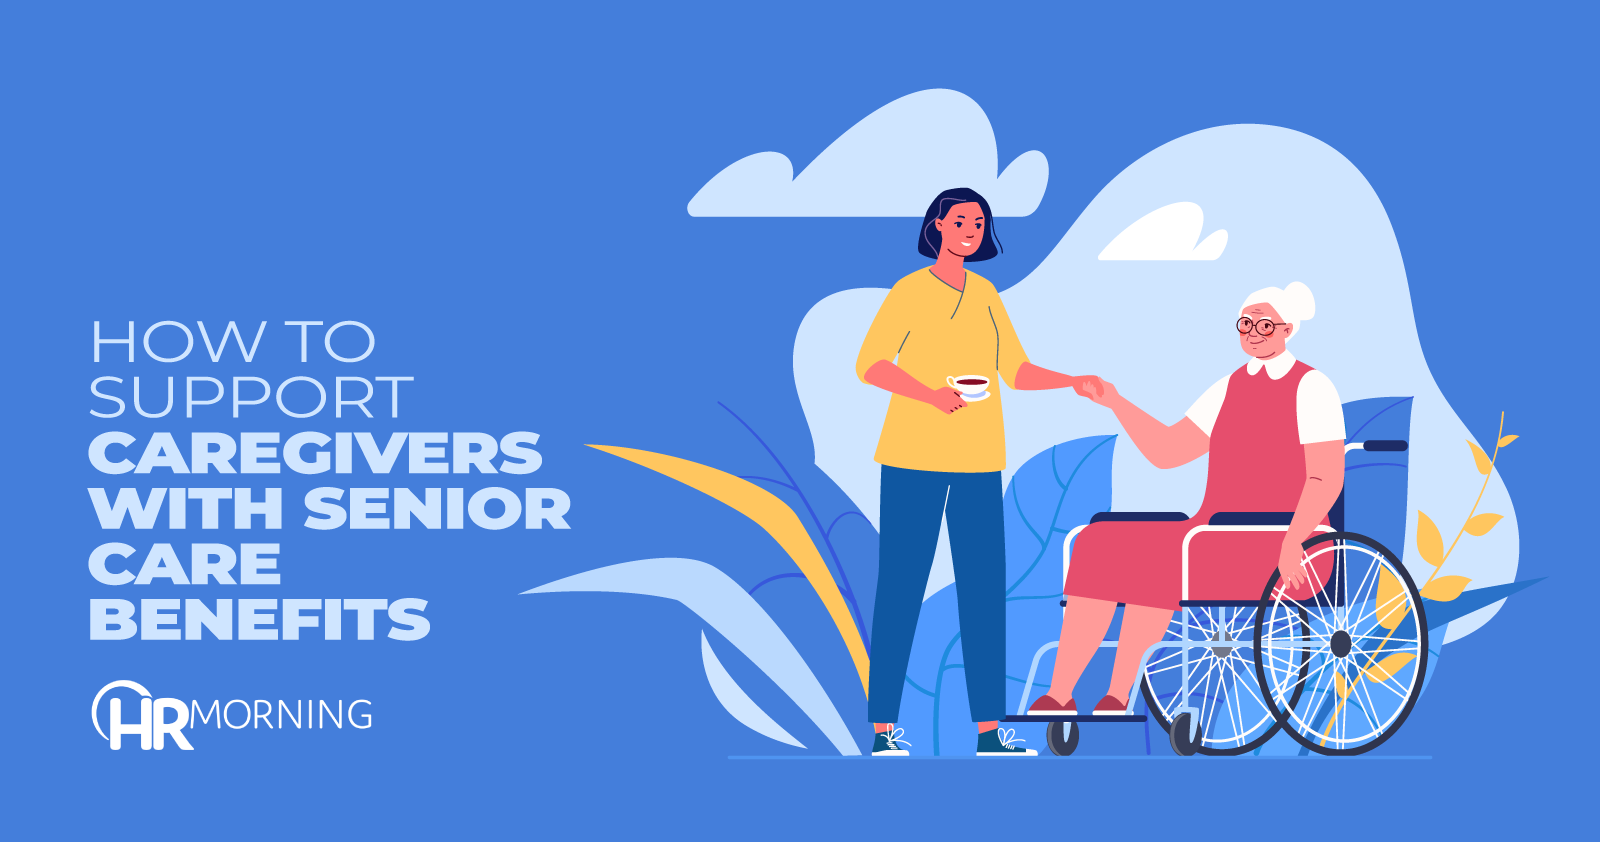 How to support caregivers with senior care benefits